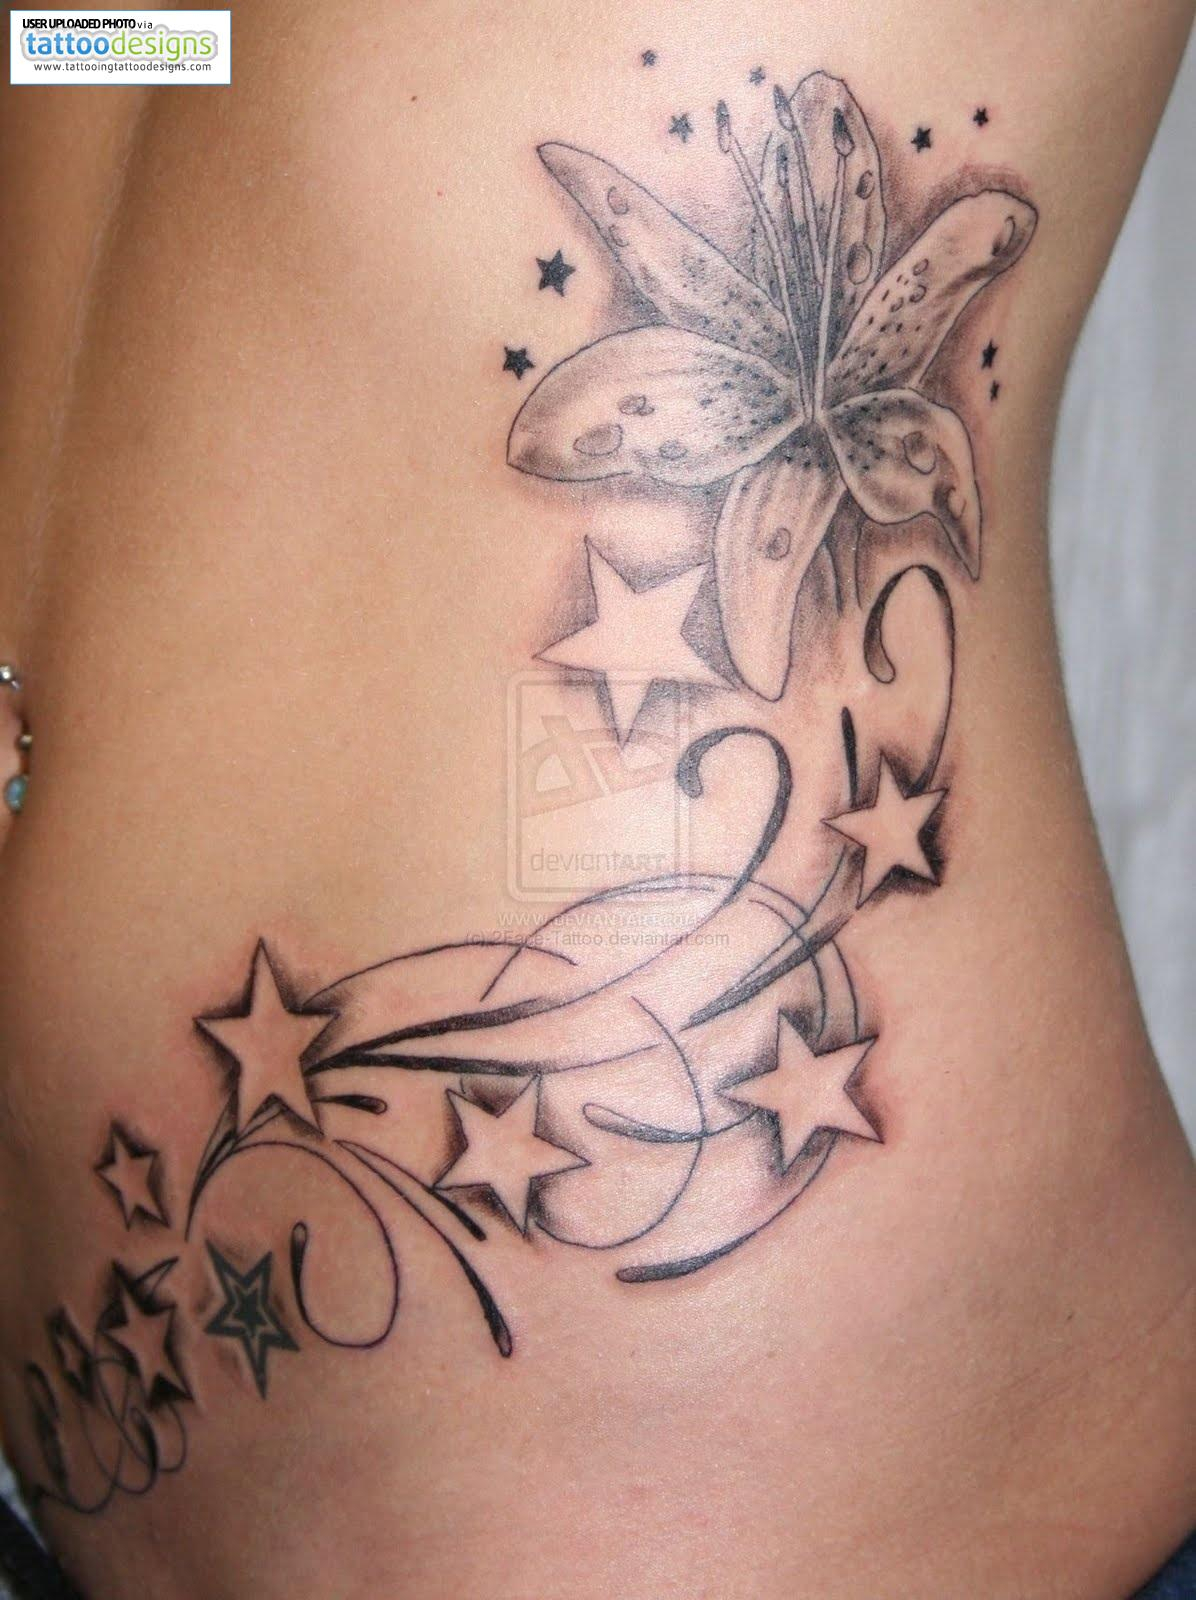 Flower Star And Butterfly Tattoo Designs Favorite Girl Tattoos Of within size 1196 X 1600